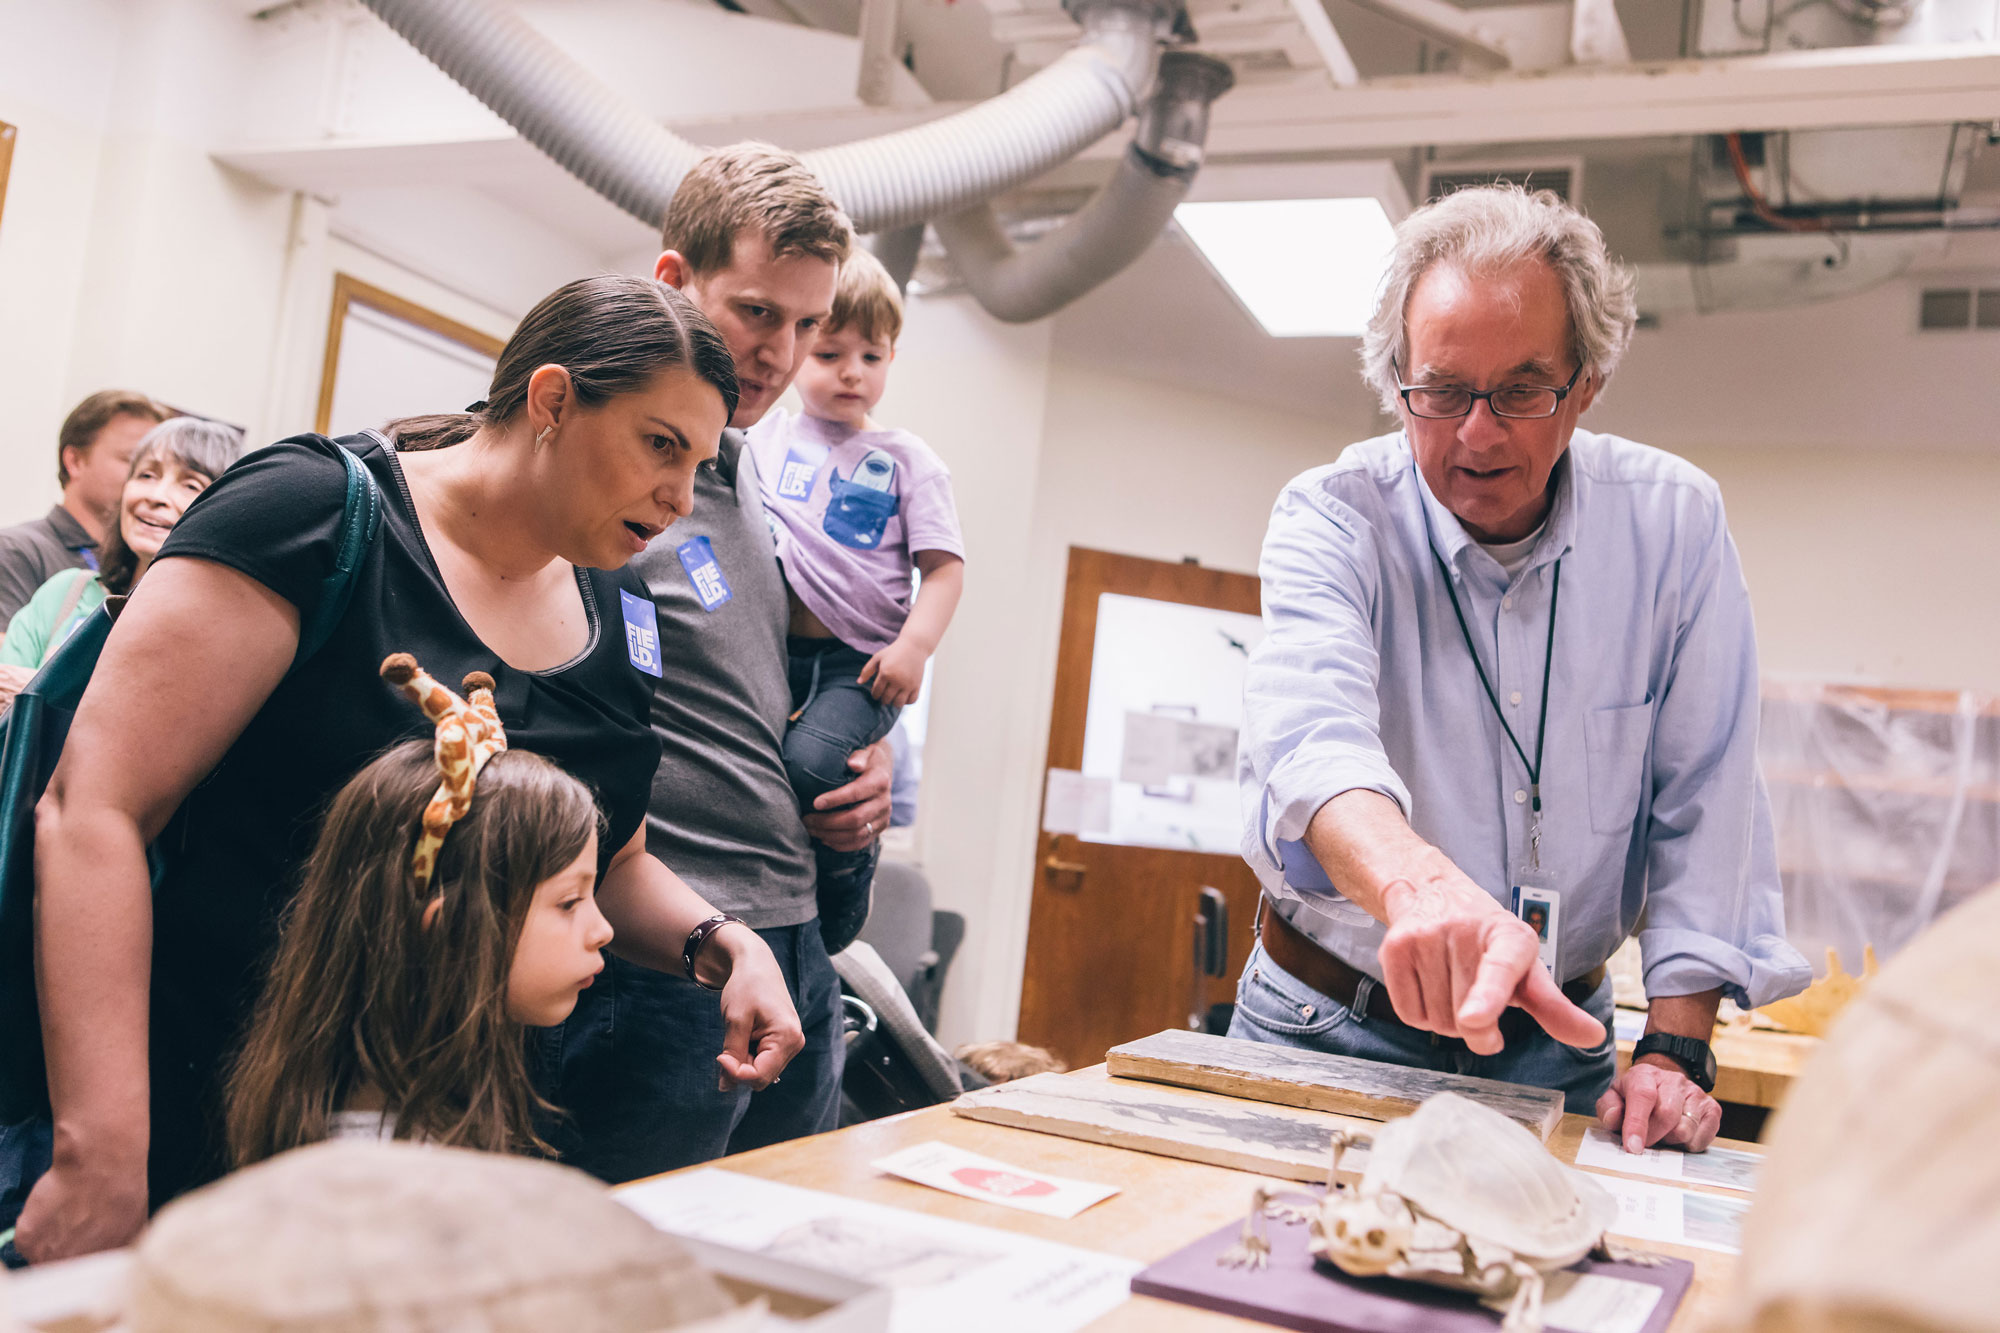 Two adults and two children listen to a staff member, who points to a specimen on display at Members’ Nights.